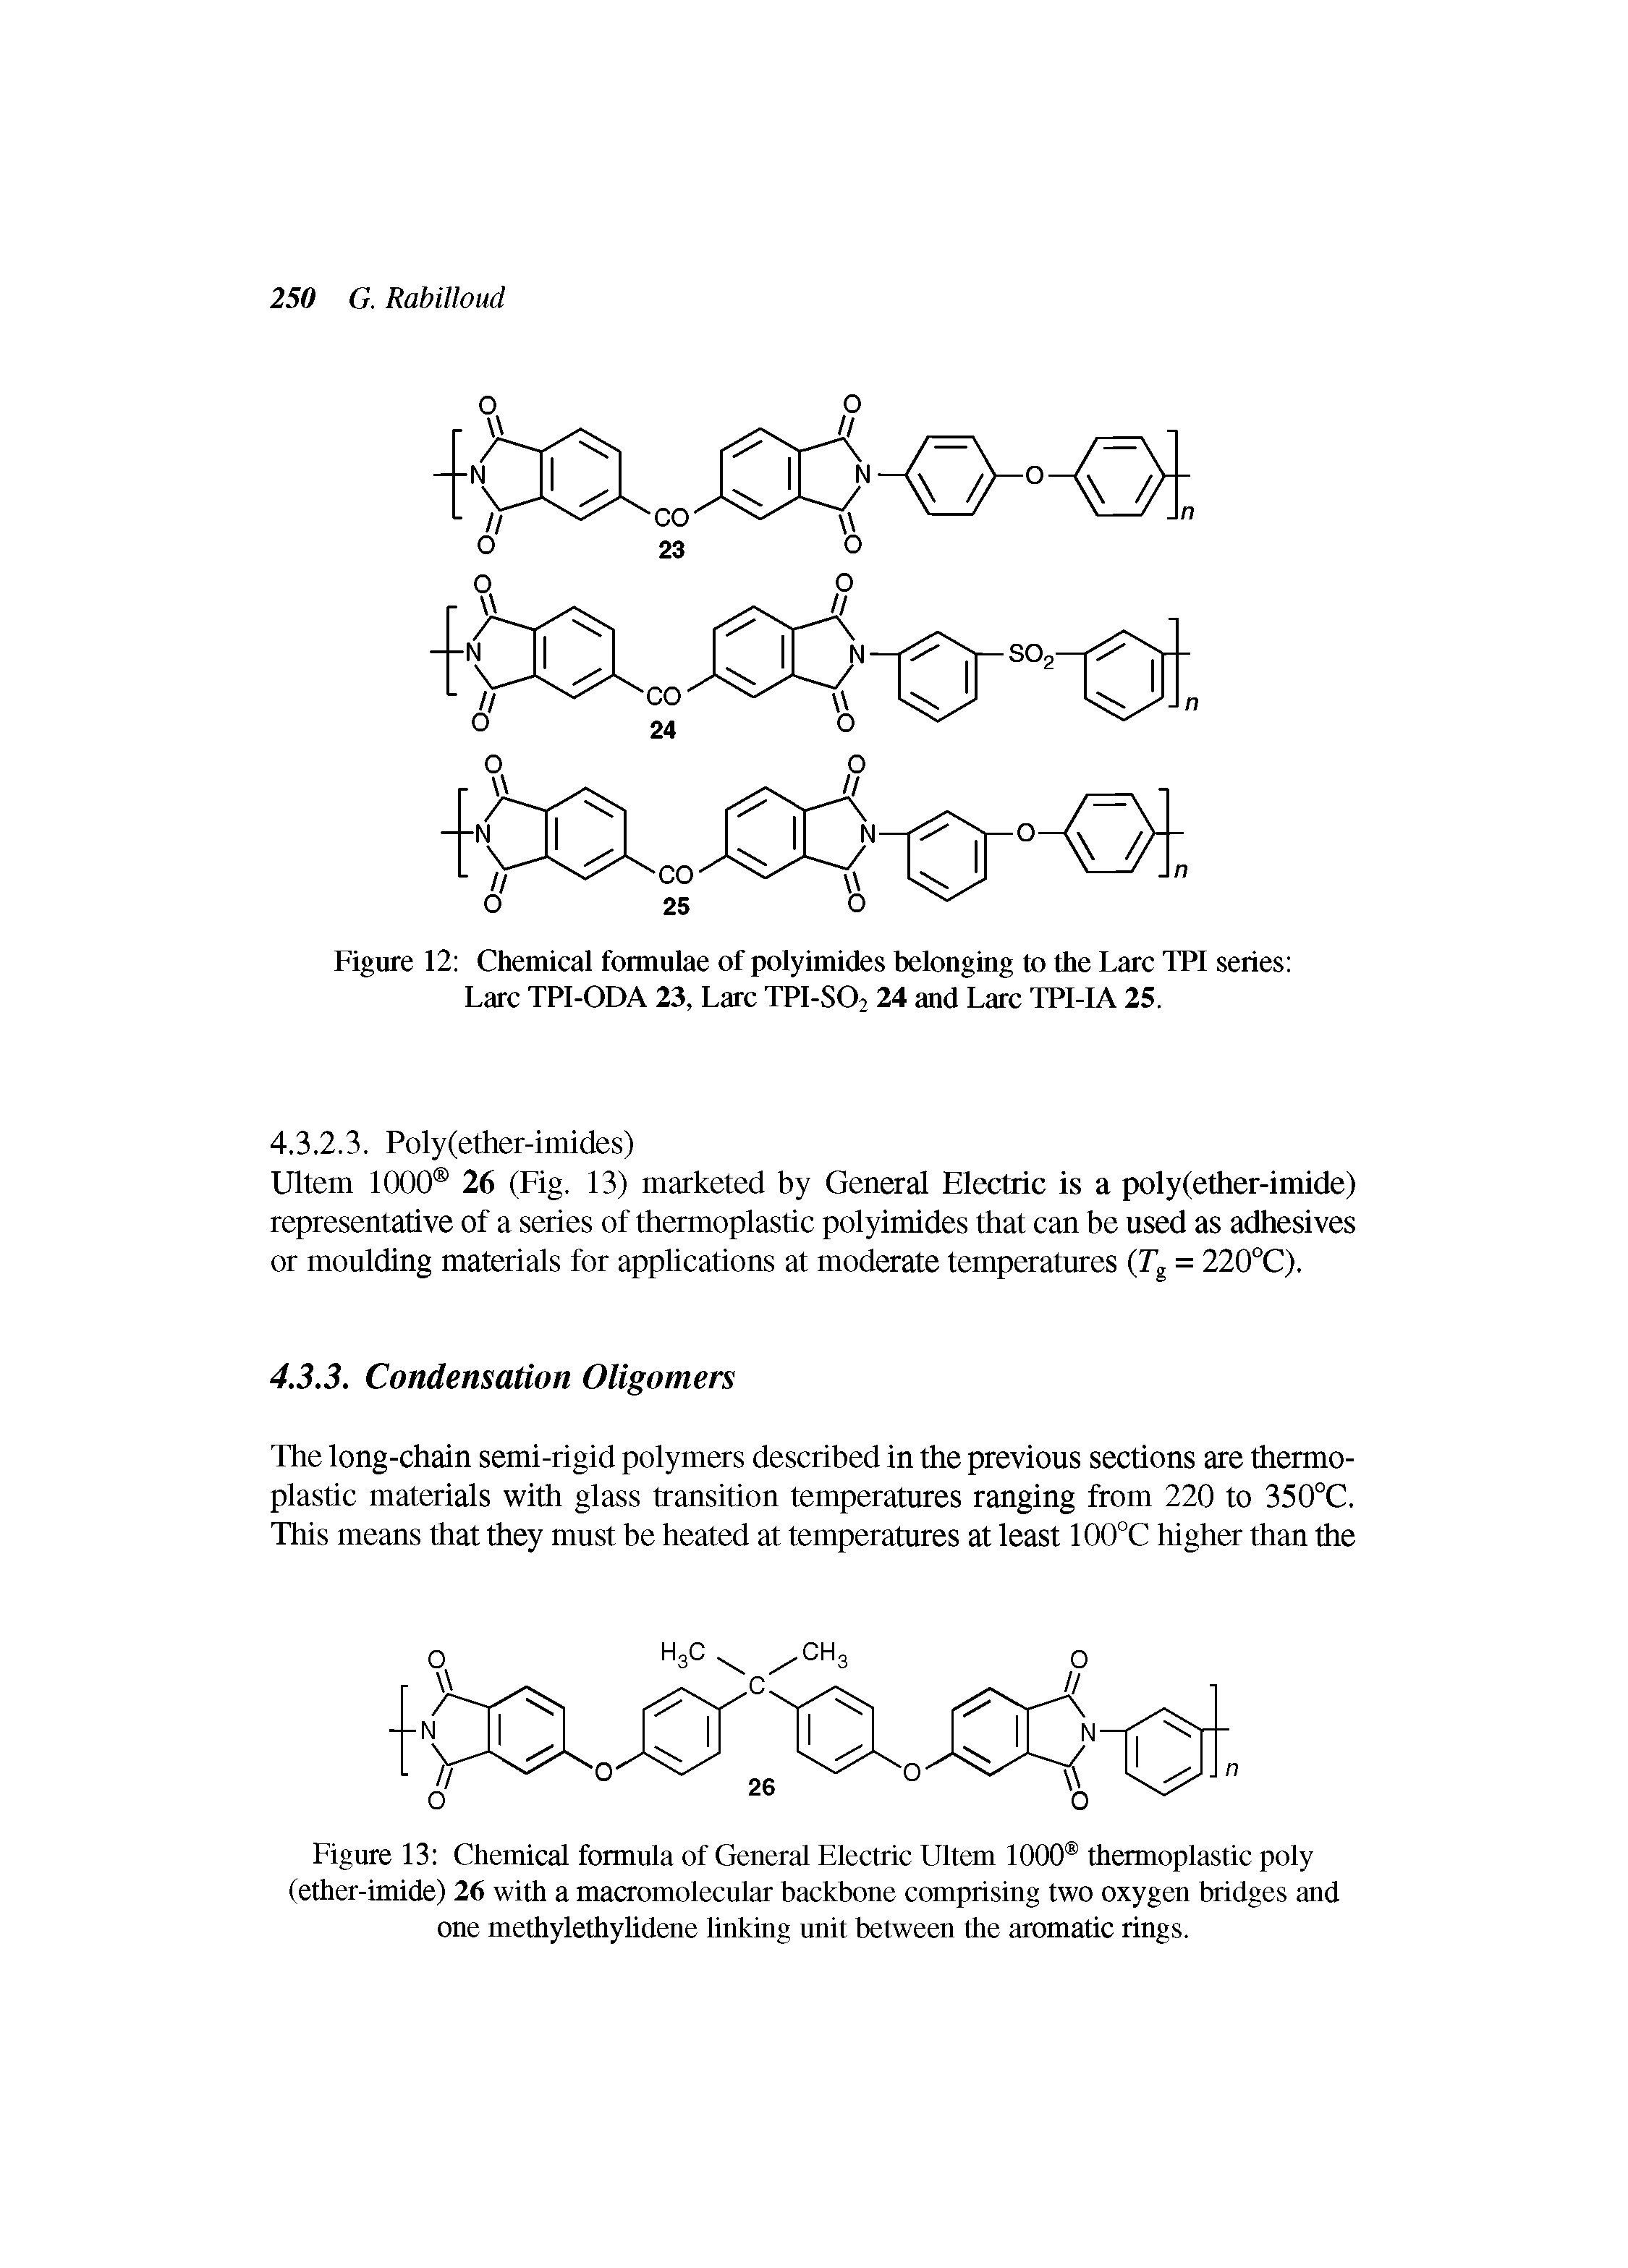 Figure 13 Chemical formula of General Electric Ultem 1000 thermoplastic poly (ether-imide) 26 with a macromolecular backbone comprising two oxygen bridges and one methylethylidene linking unit between the aromatic rings.